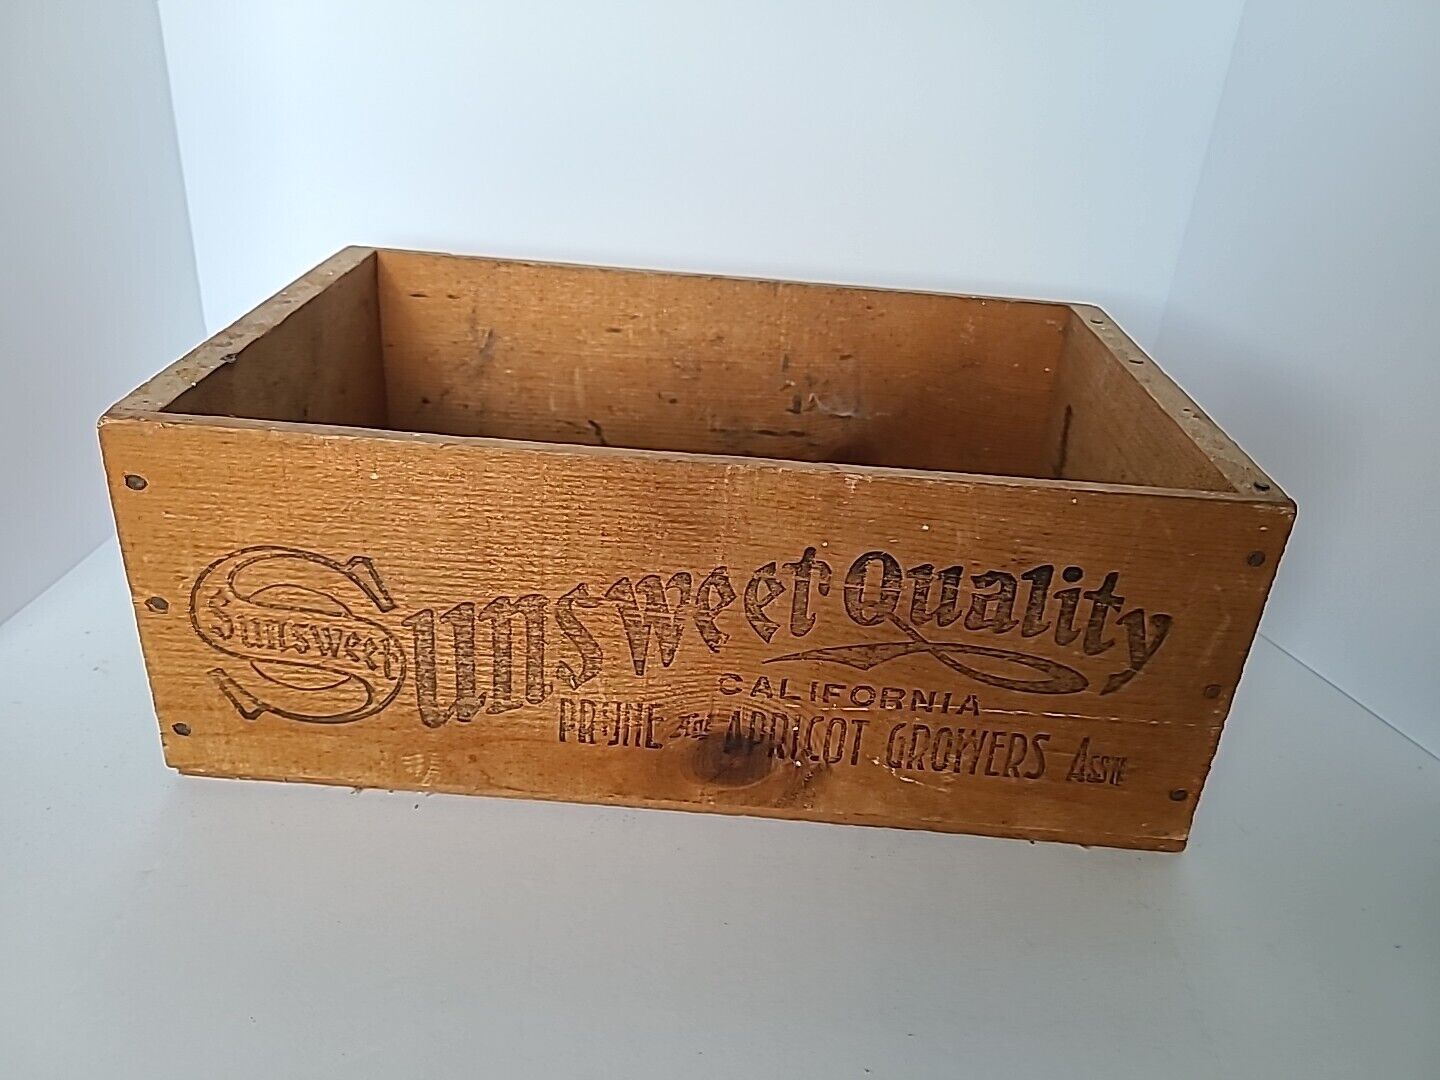 VINTAGE Sunsweet Prunes & Apricot 25 Lbs Box Crate